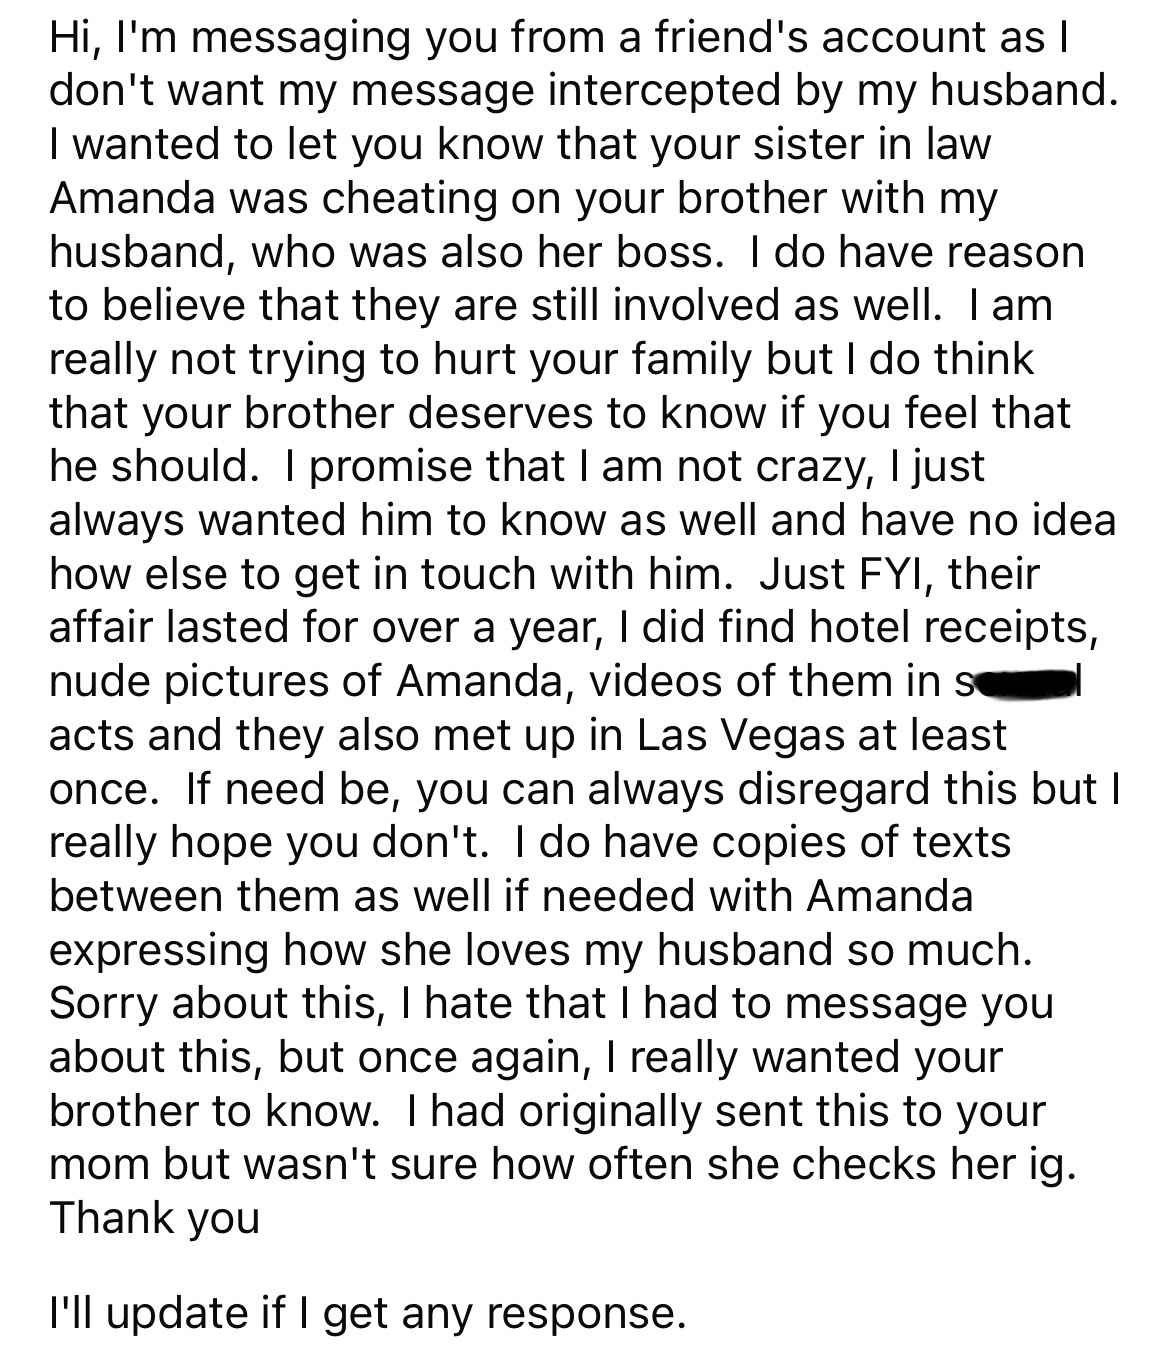 document - Hi, I'm messaging you from a friend's account as I don't want my message intercepted by my husband. I wanted to let you know that your sister in law Amanda was cheating on your brother with my husband, who was also her boss. I do have reason to